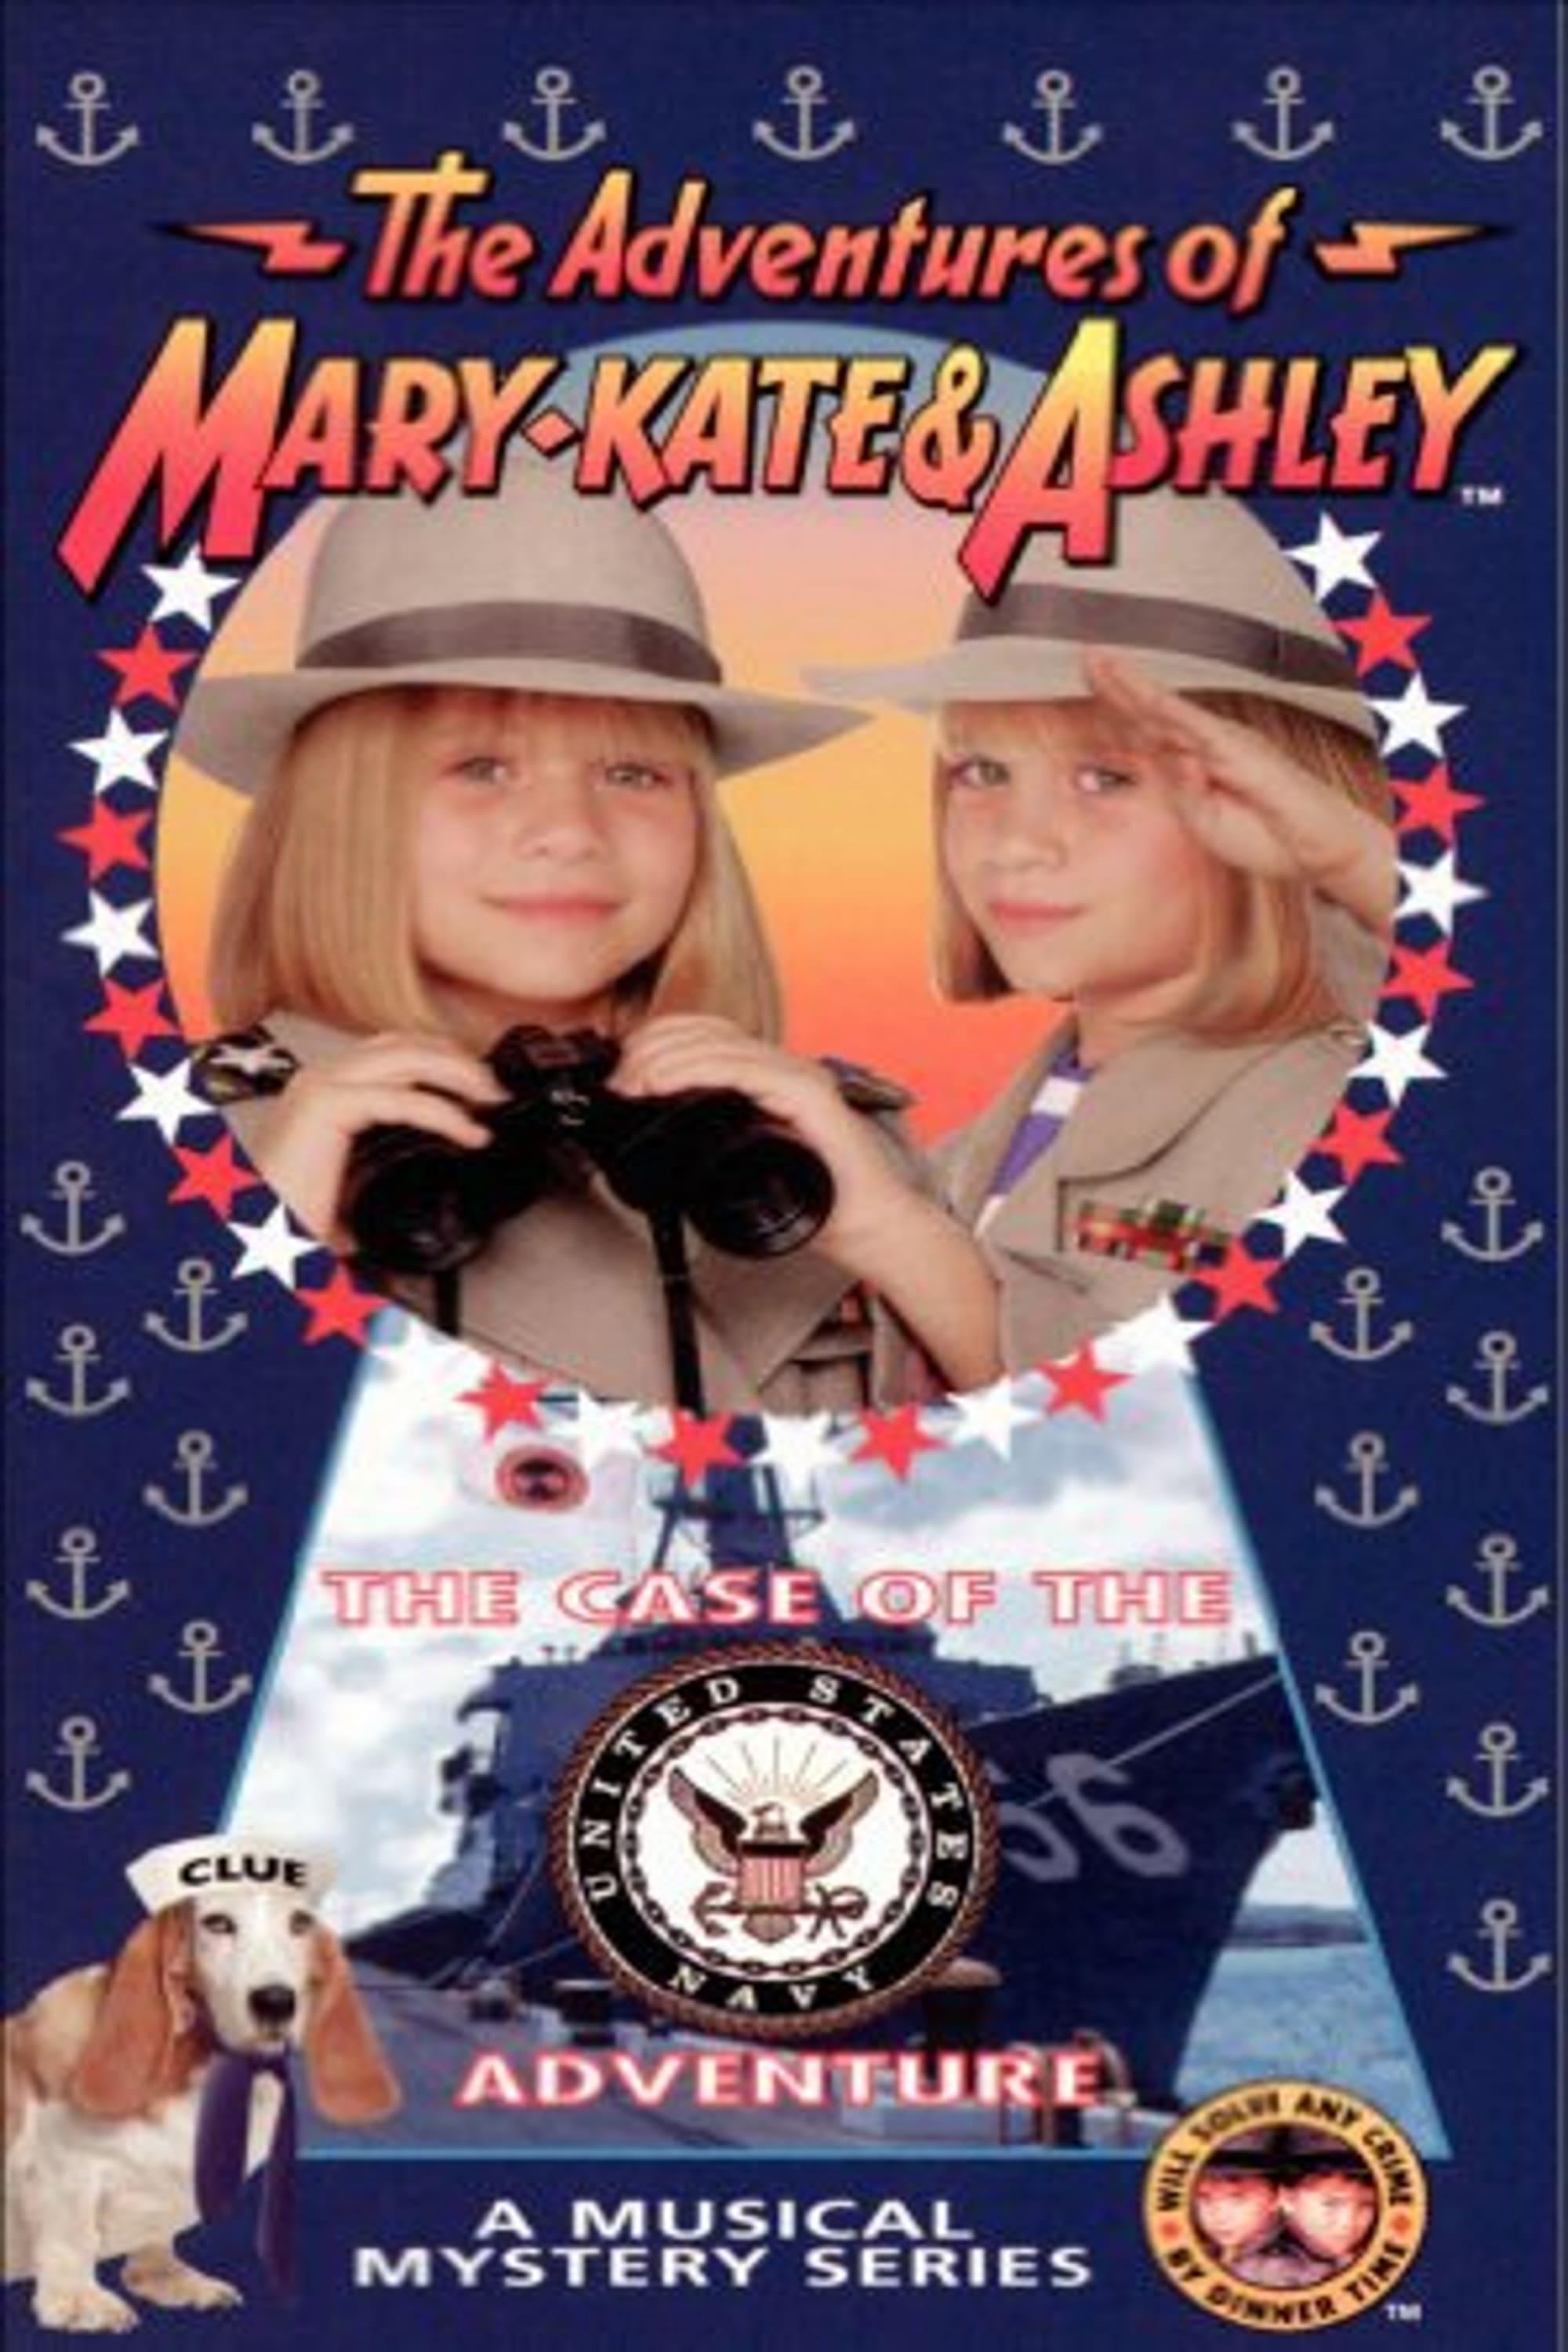 The Adventures of Mary-Kate & Ashley: The Case of the United States Navy Adventure poster